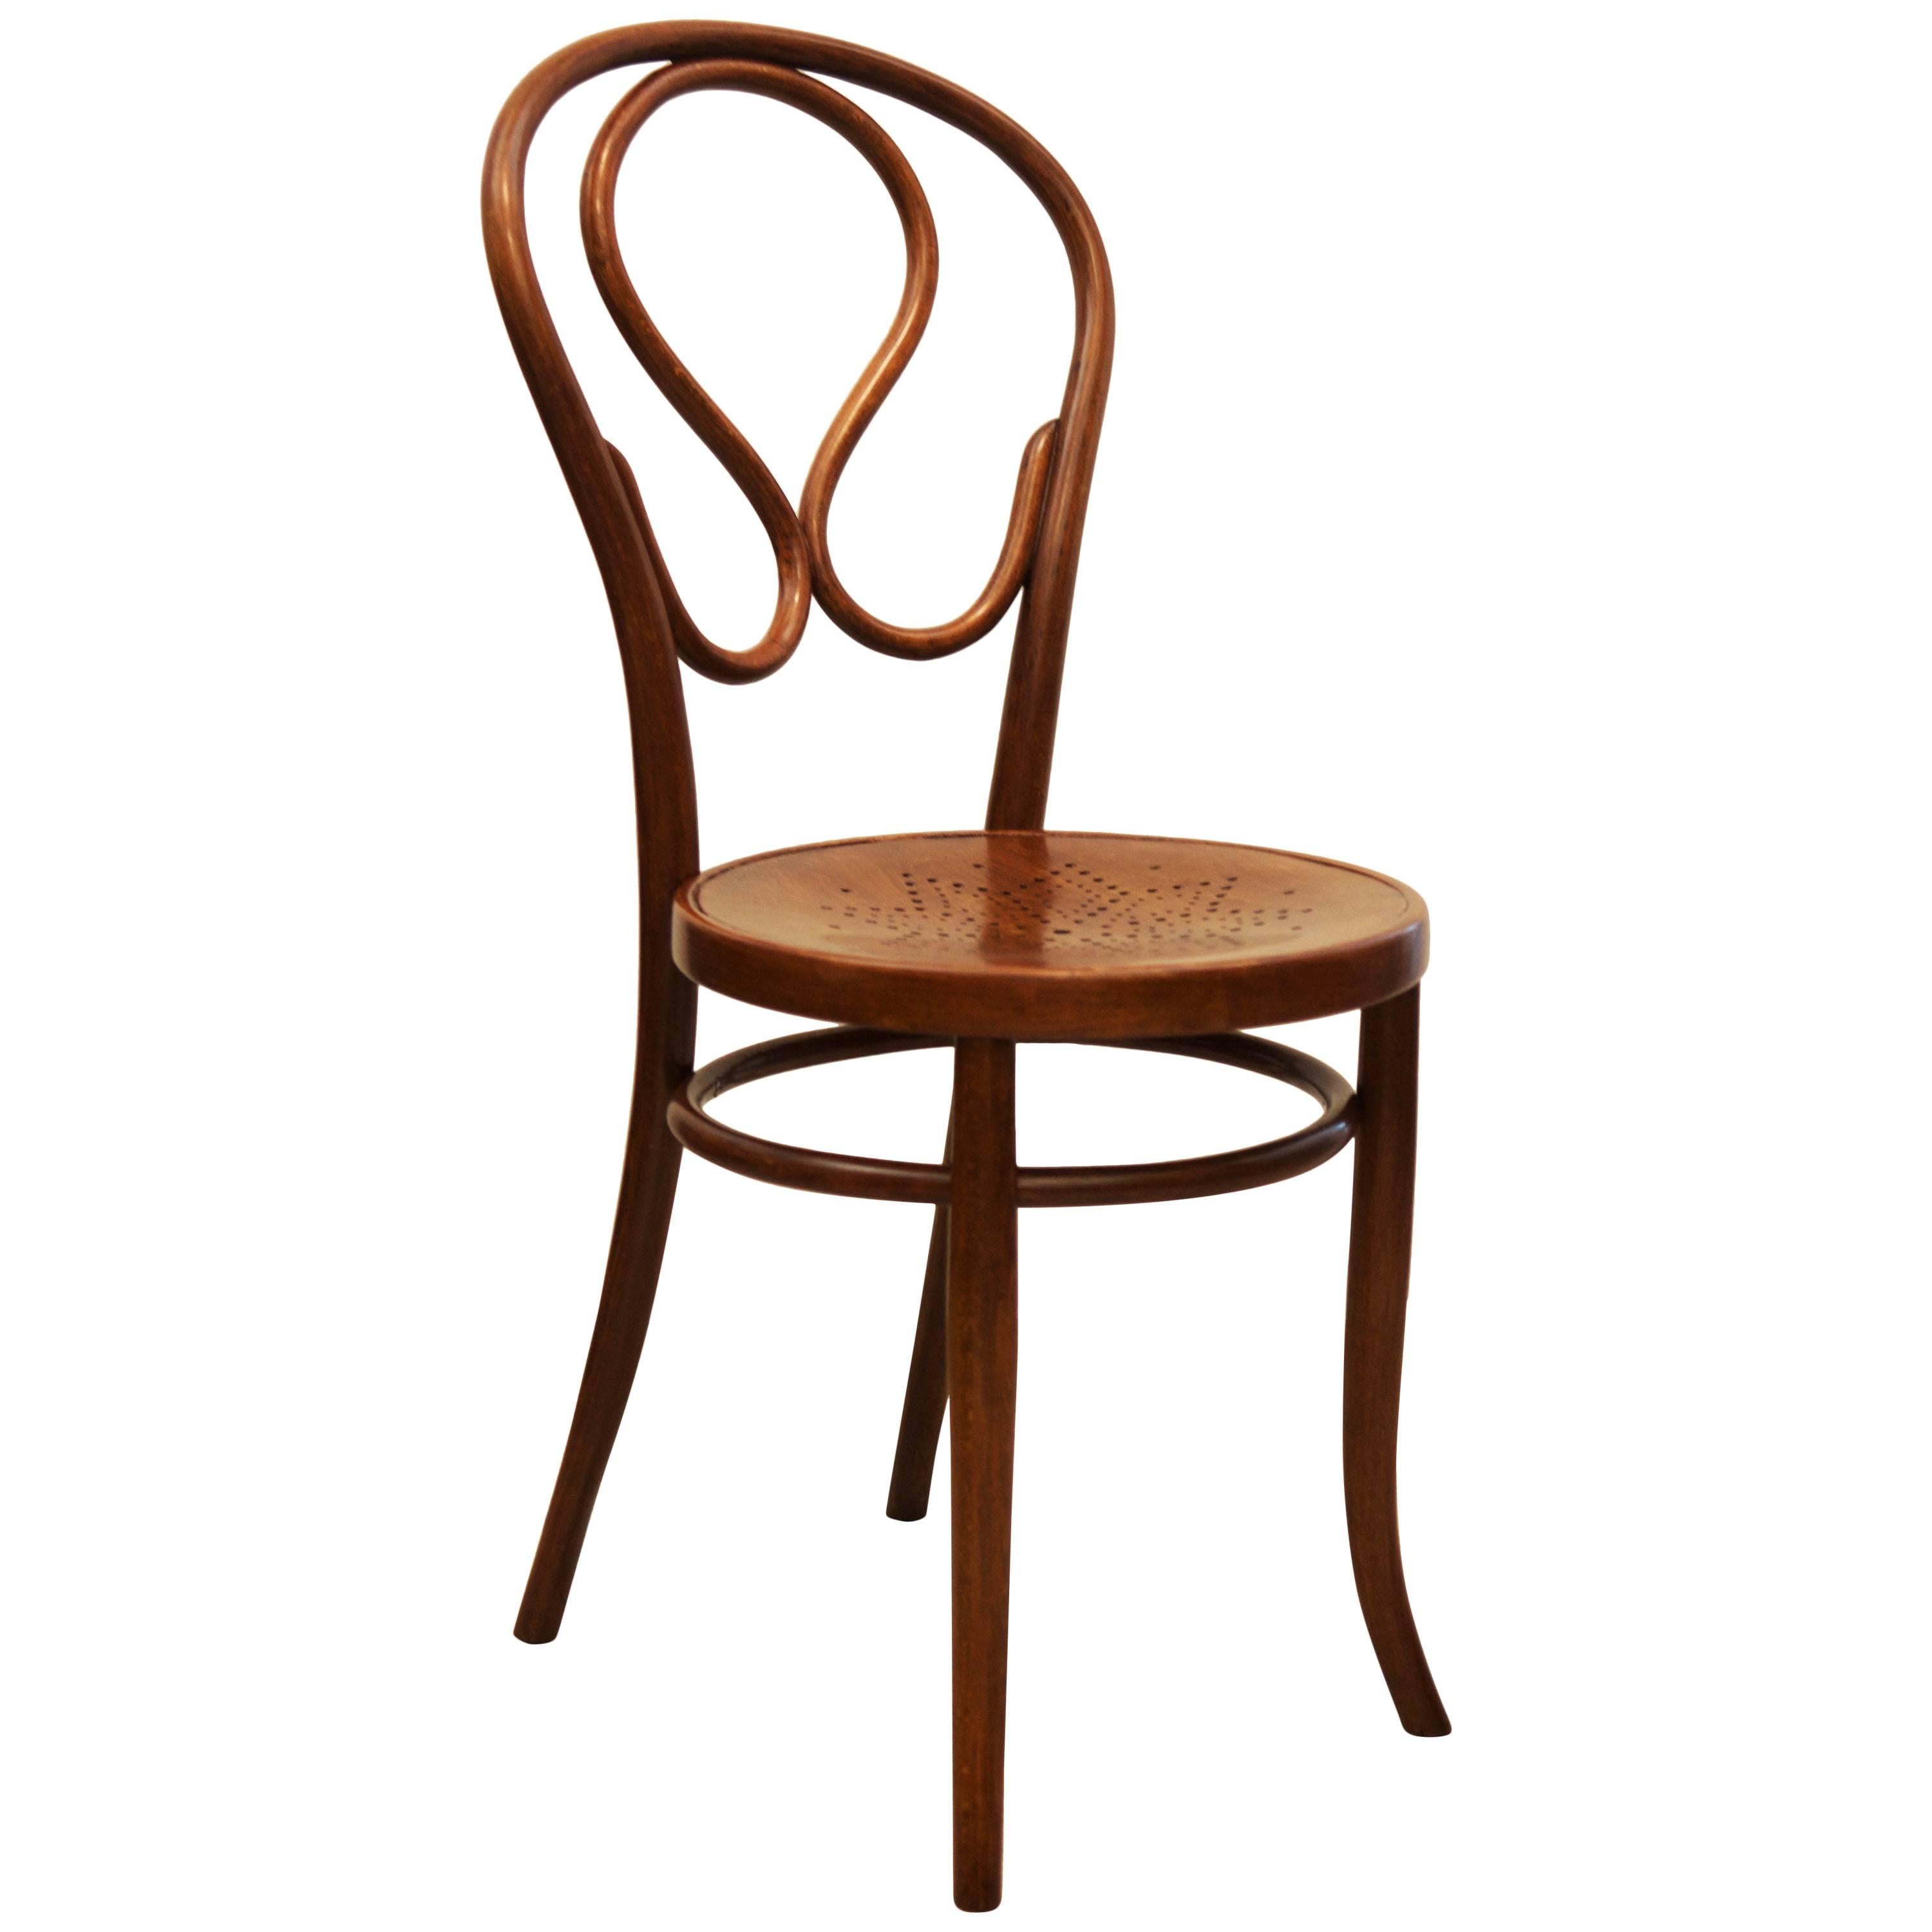 Rare Kohn Dining or Side Chair No. 20 For Sale